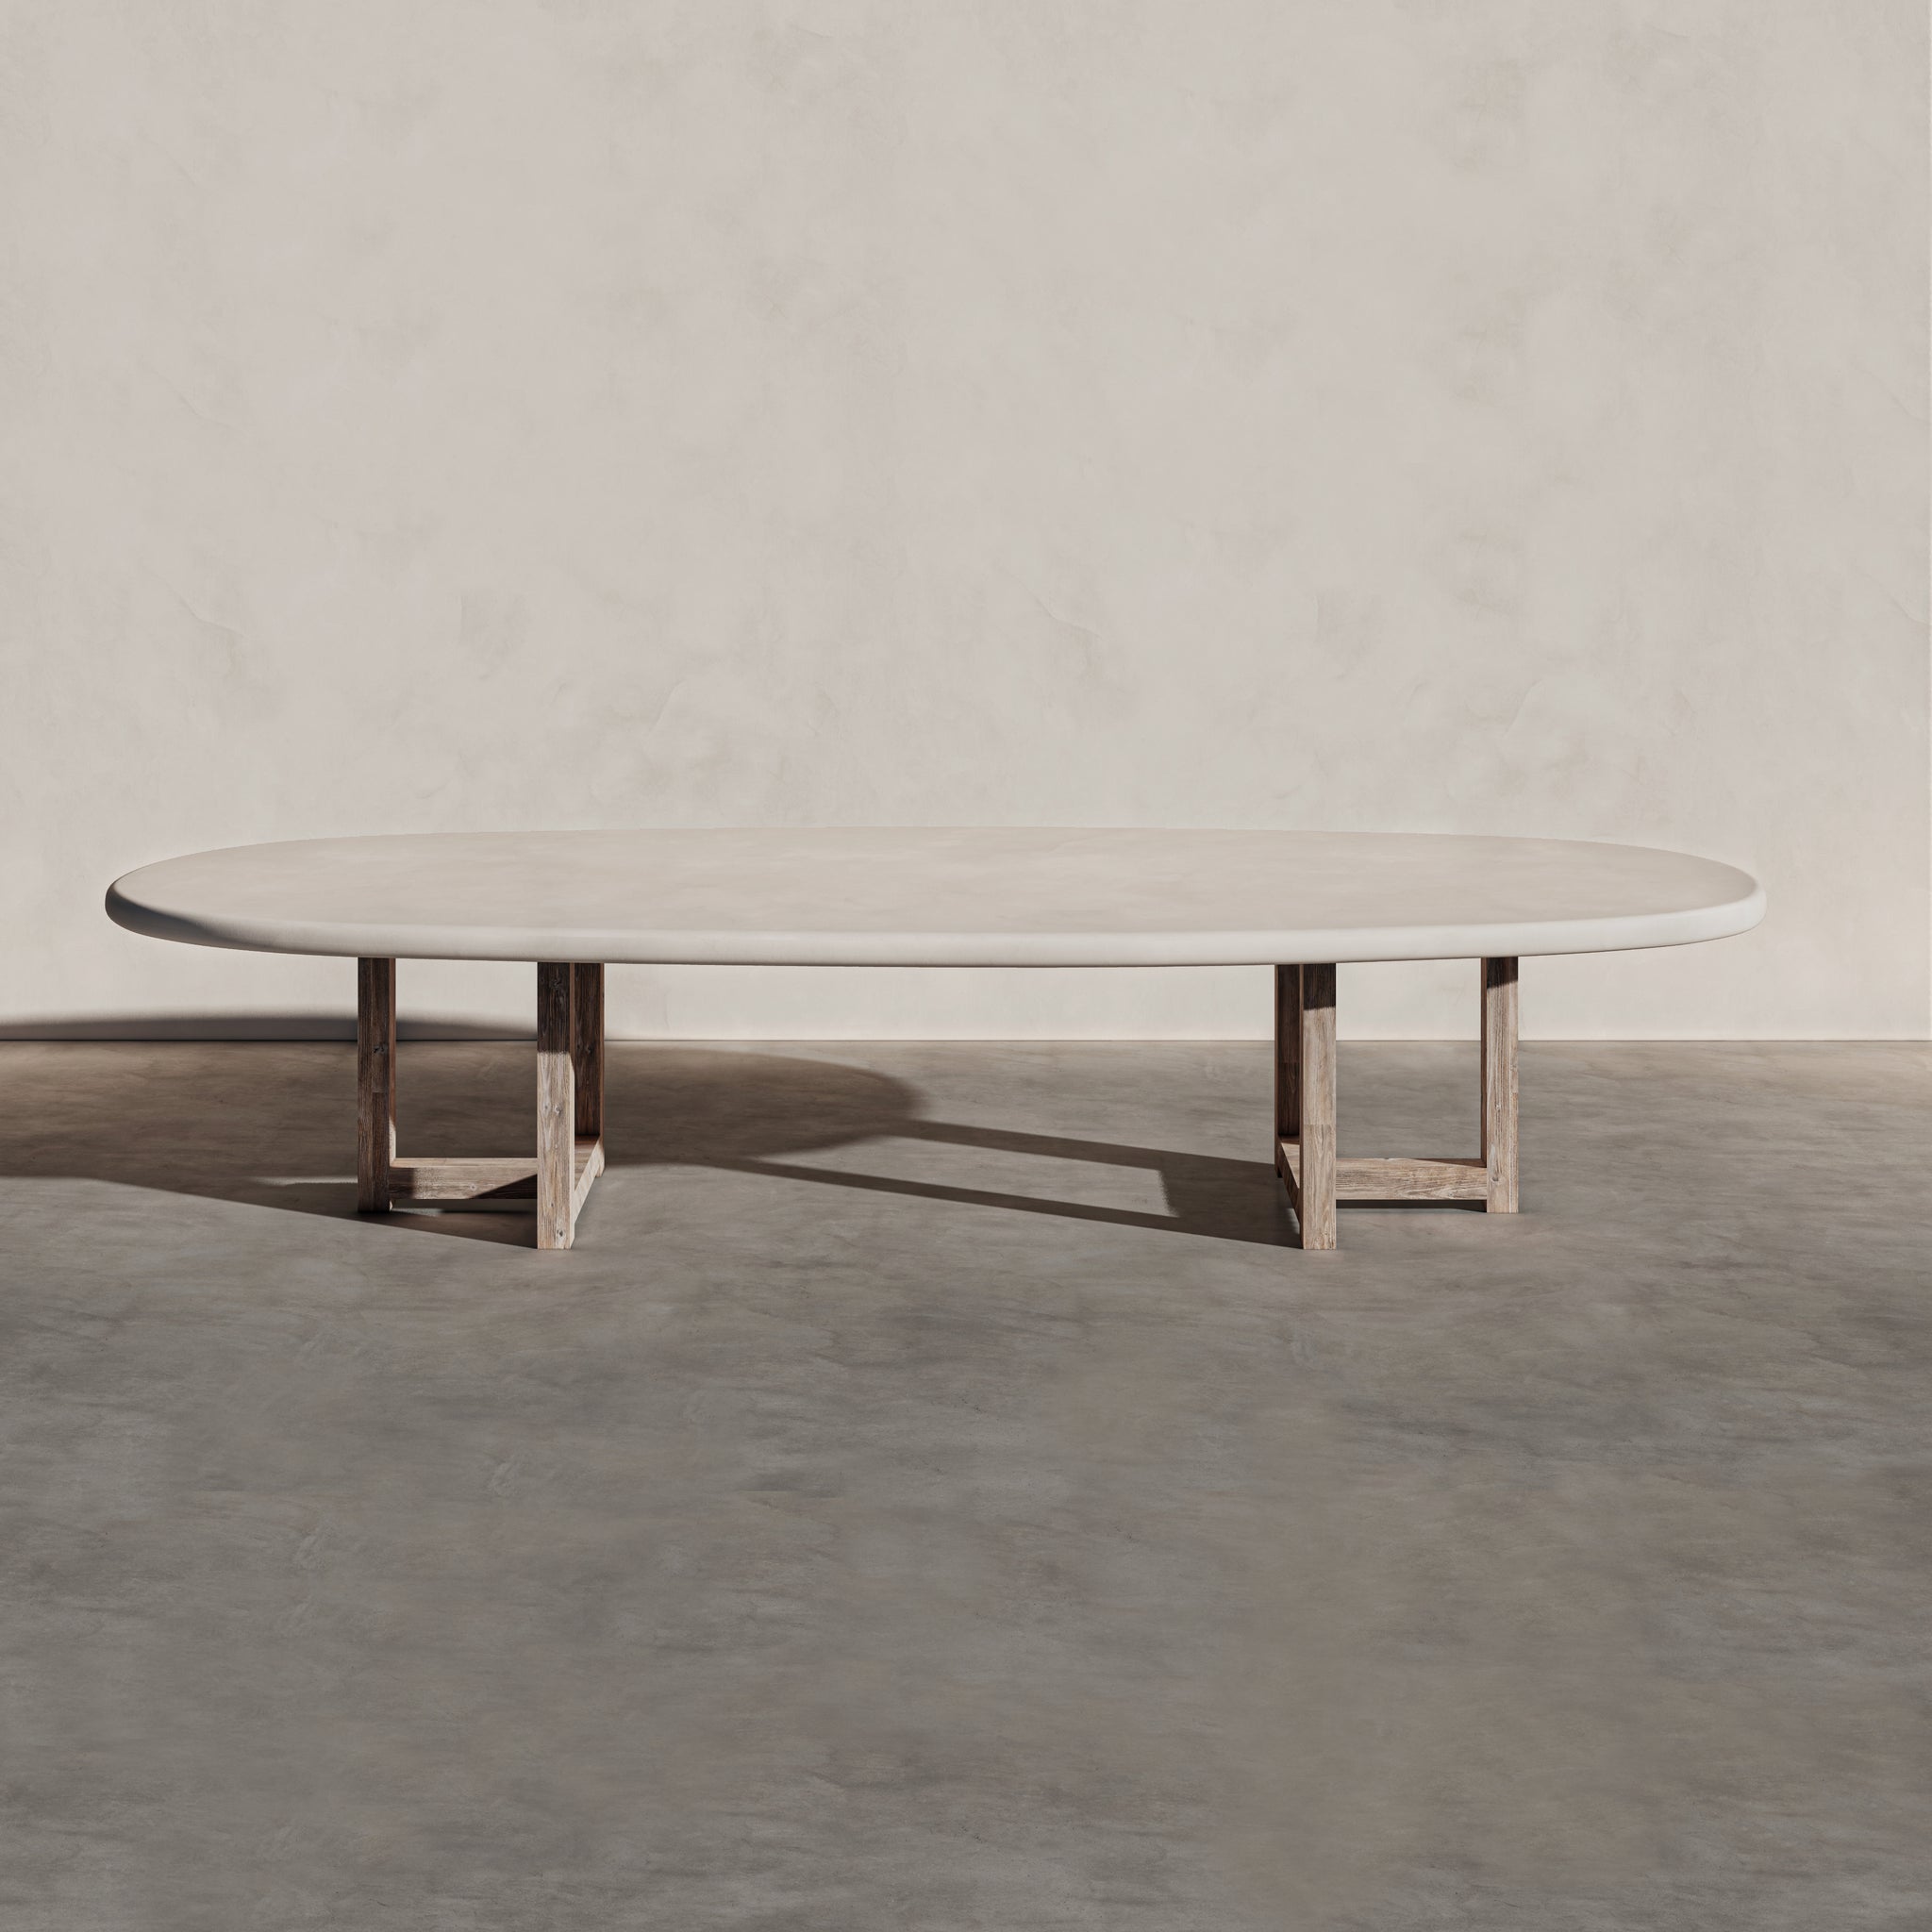 OS - Oval Dining Table with Wooden Legs